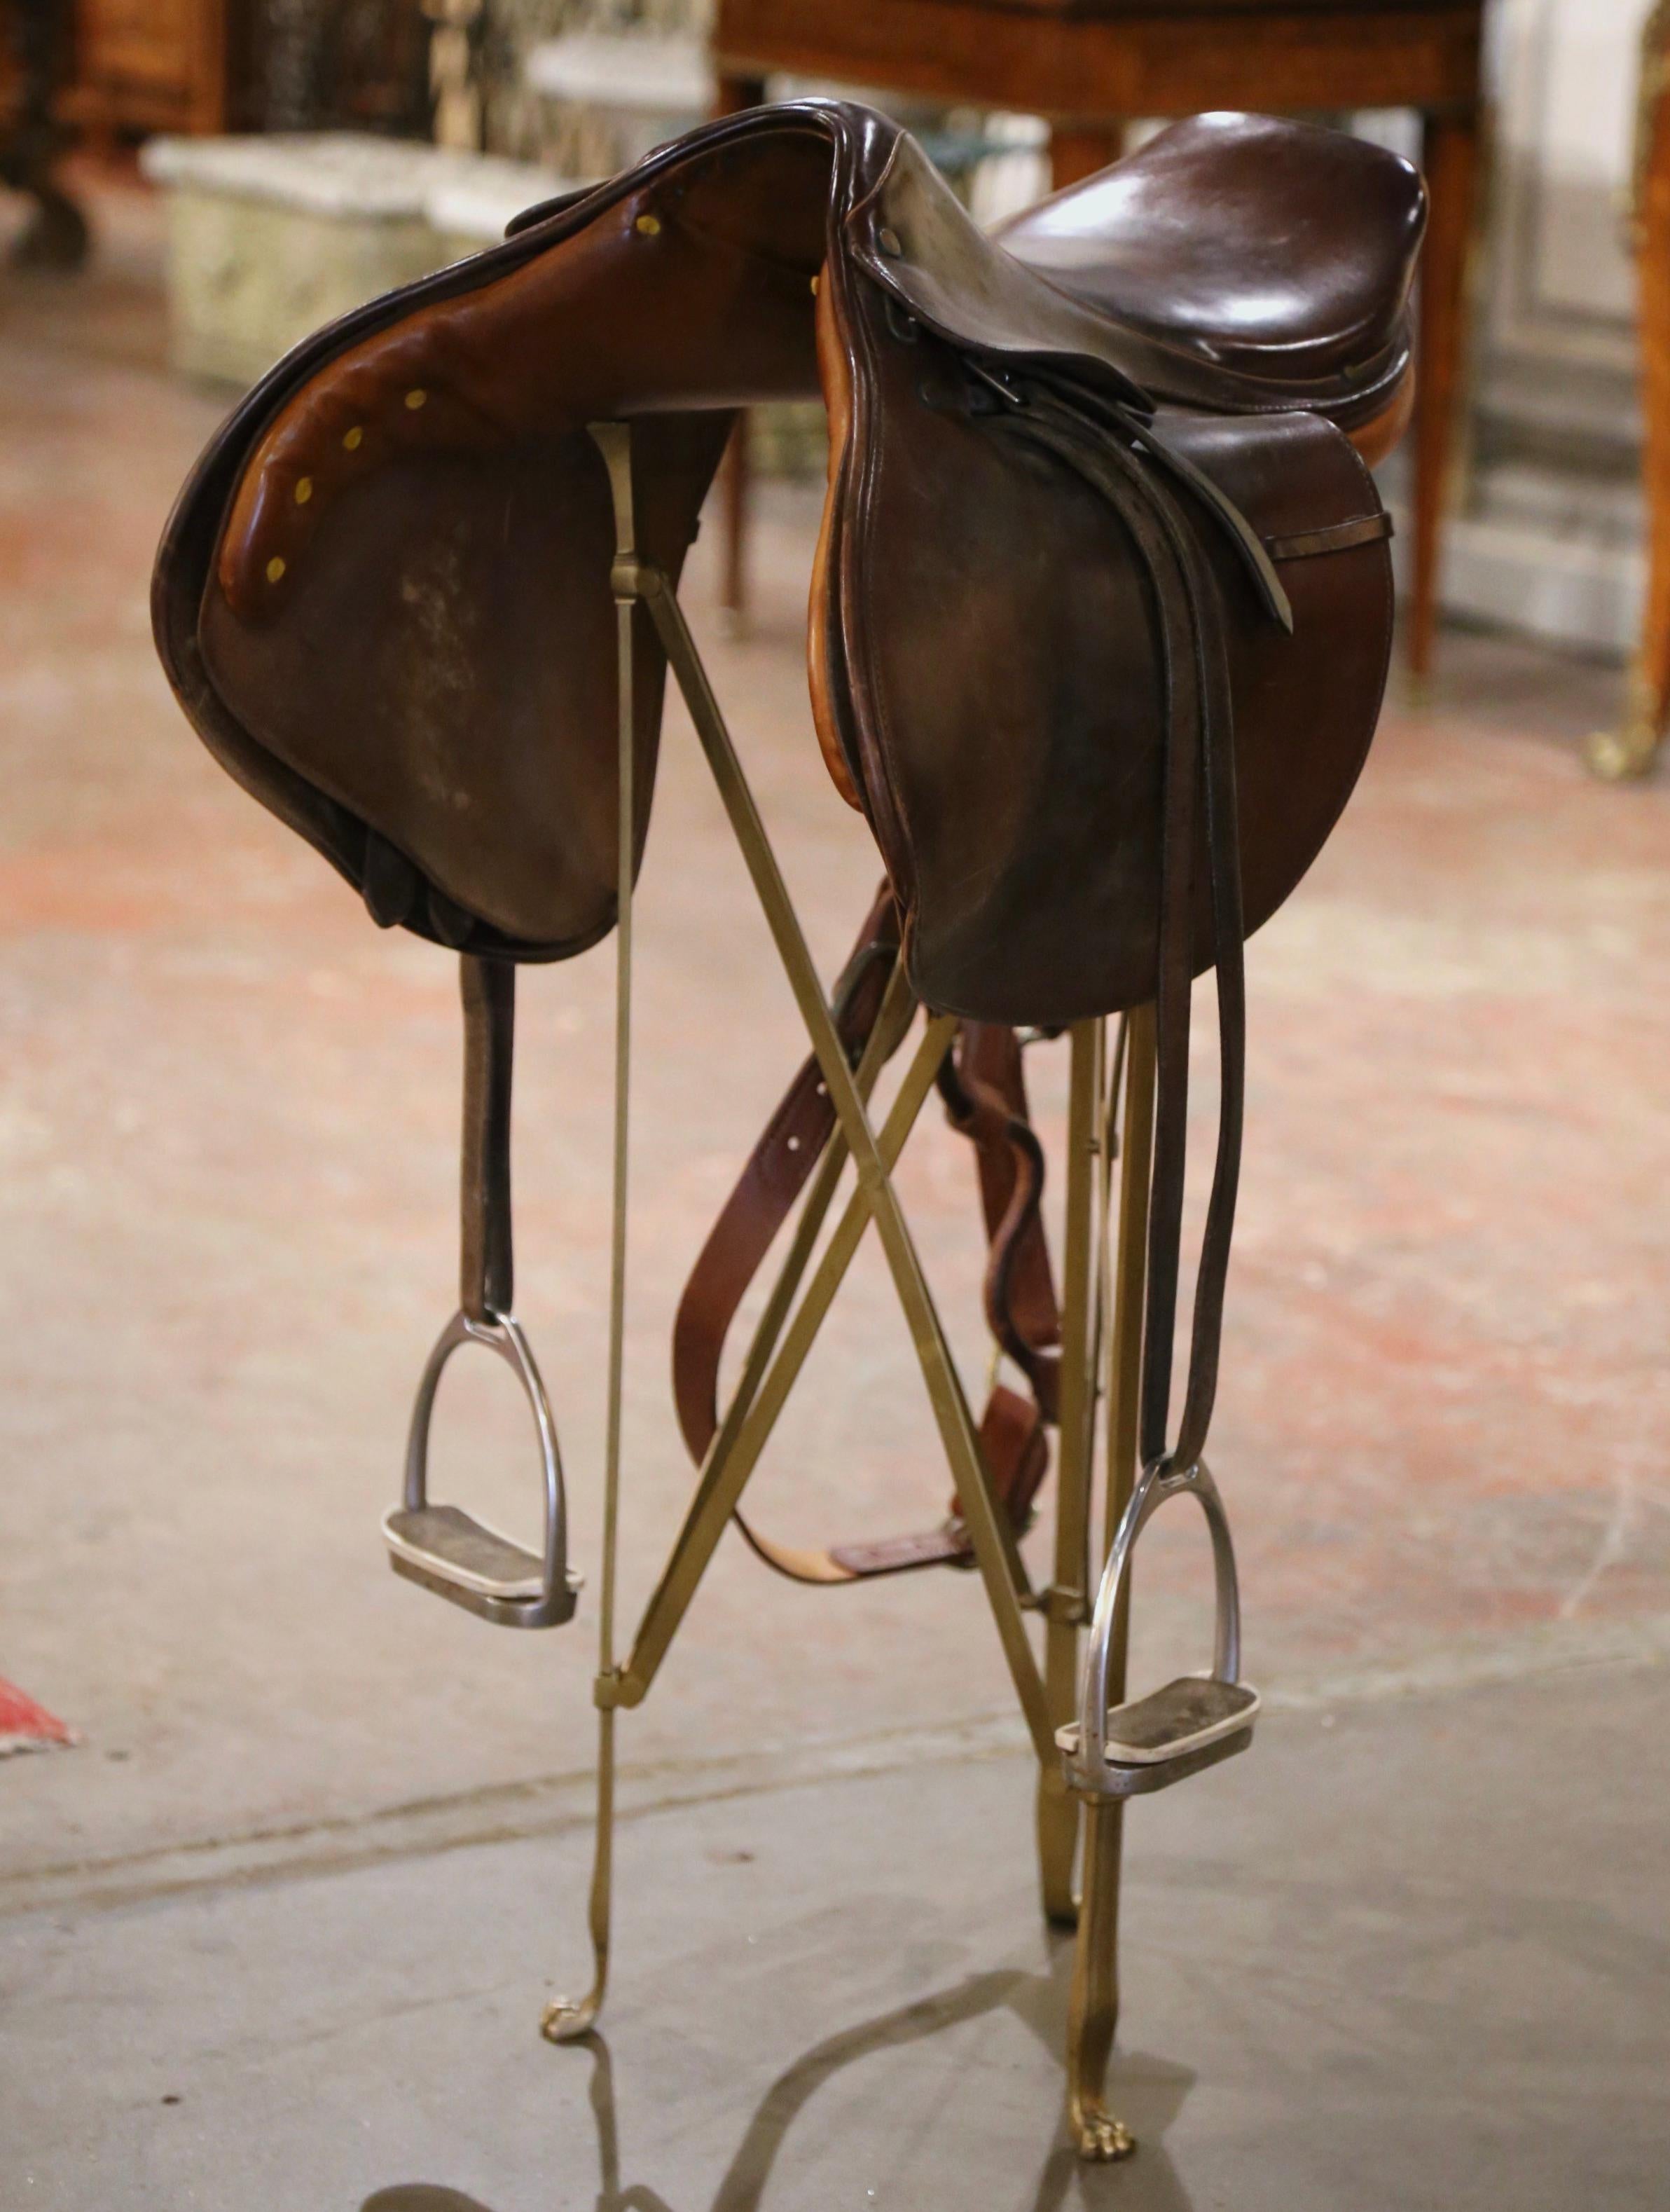 Decorate a rustic or ranch style home with this beautifully kept antique brown leather saddle from the early 20th century. Crafted circa 1950, the vintage, polo saddle is in excellent condition and adorns a rich patinated finish.
Measures: 29